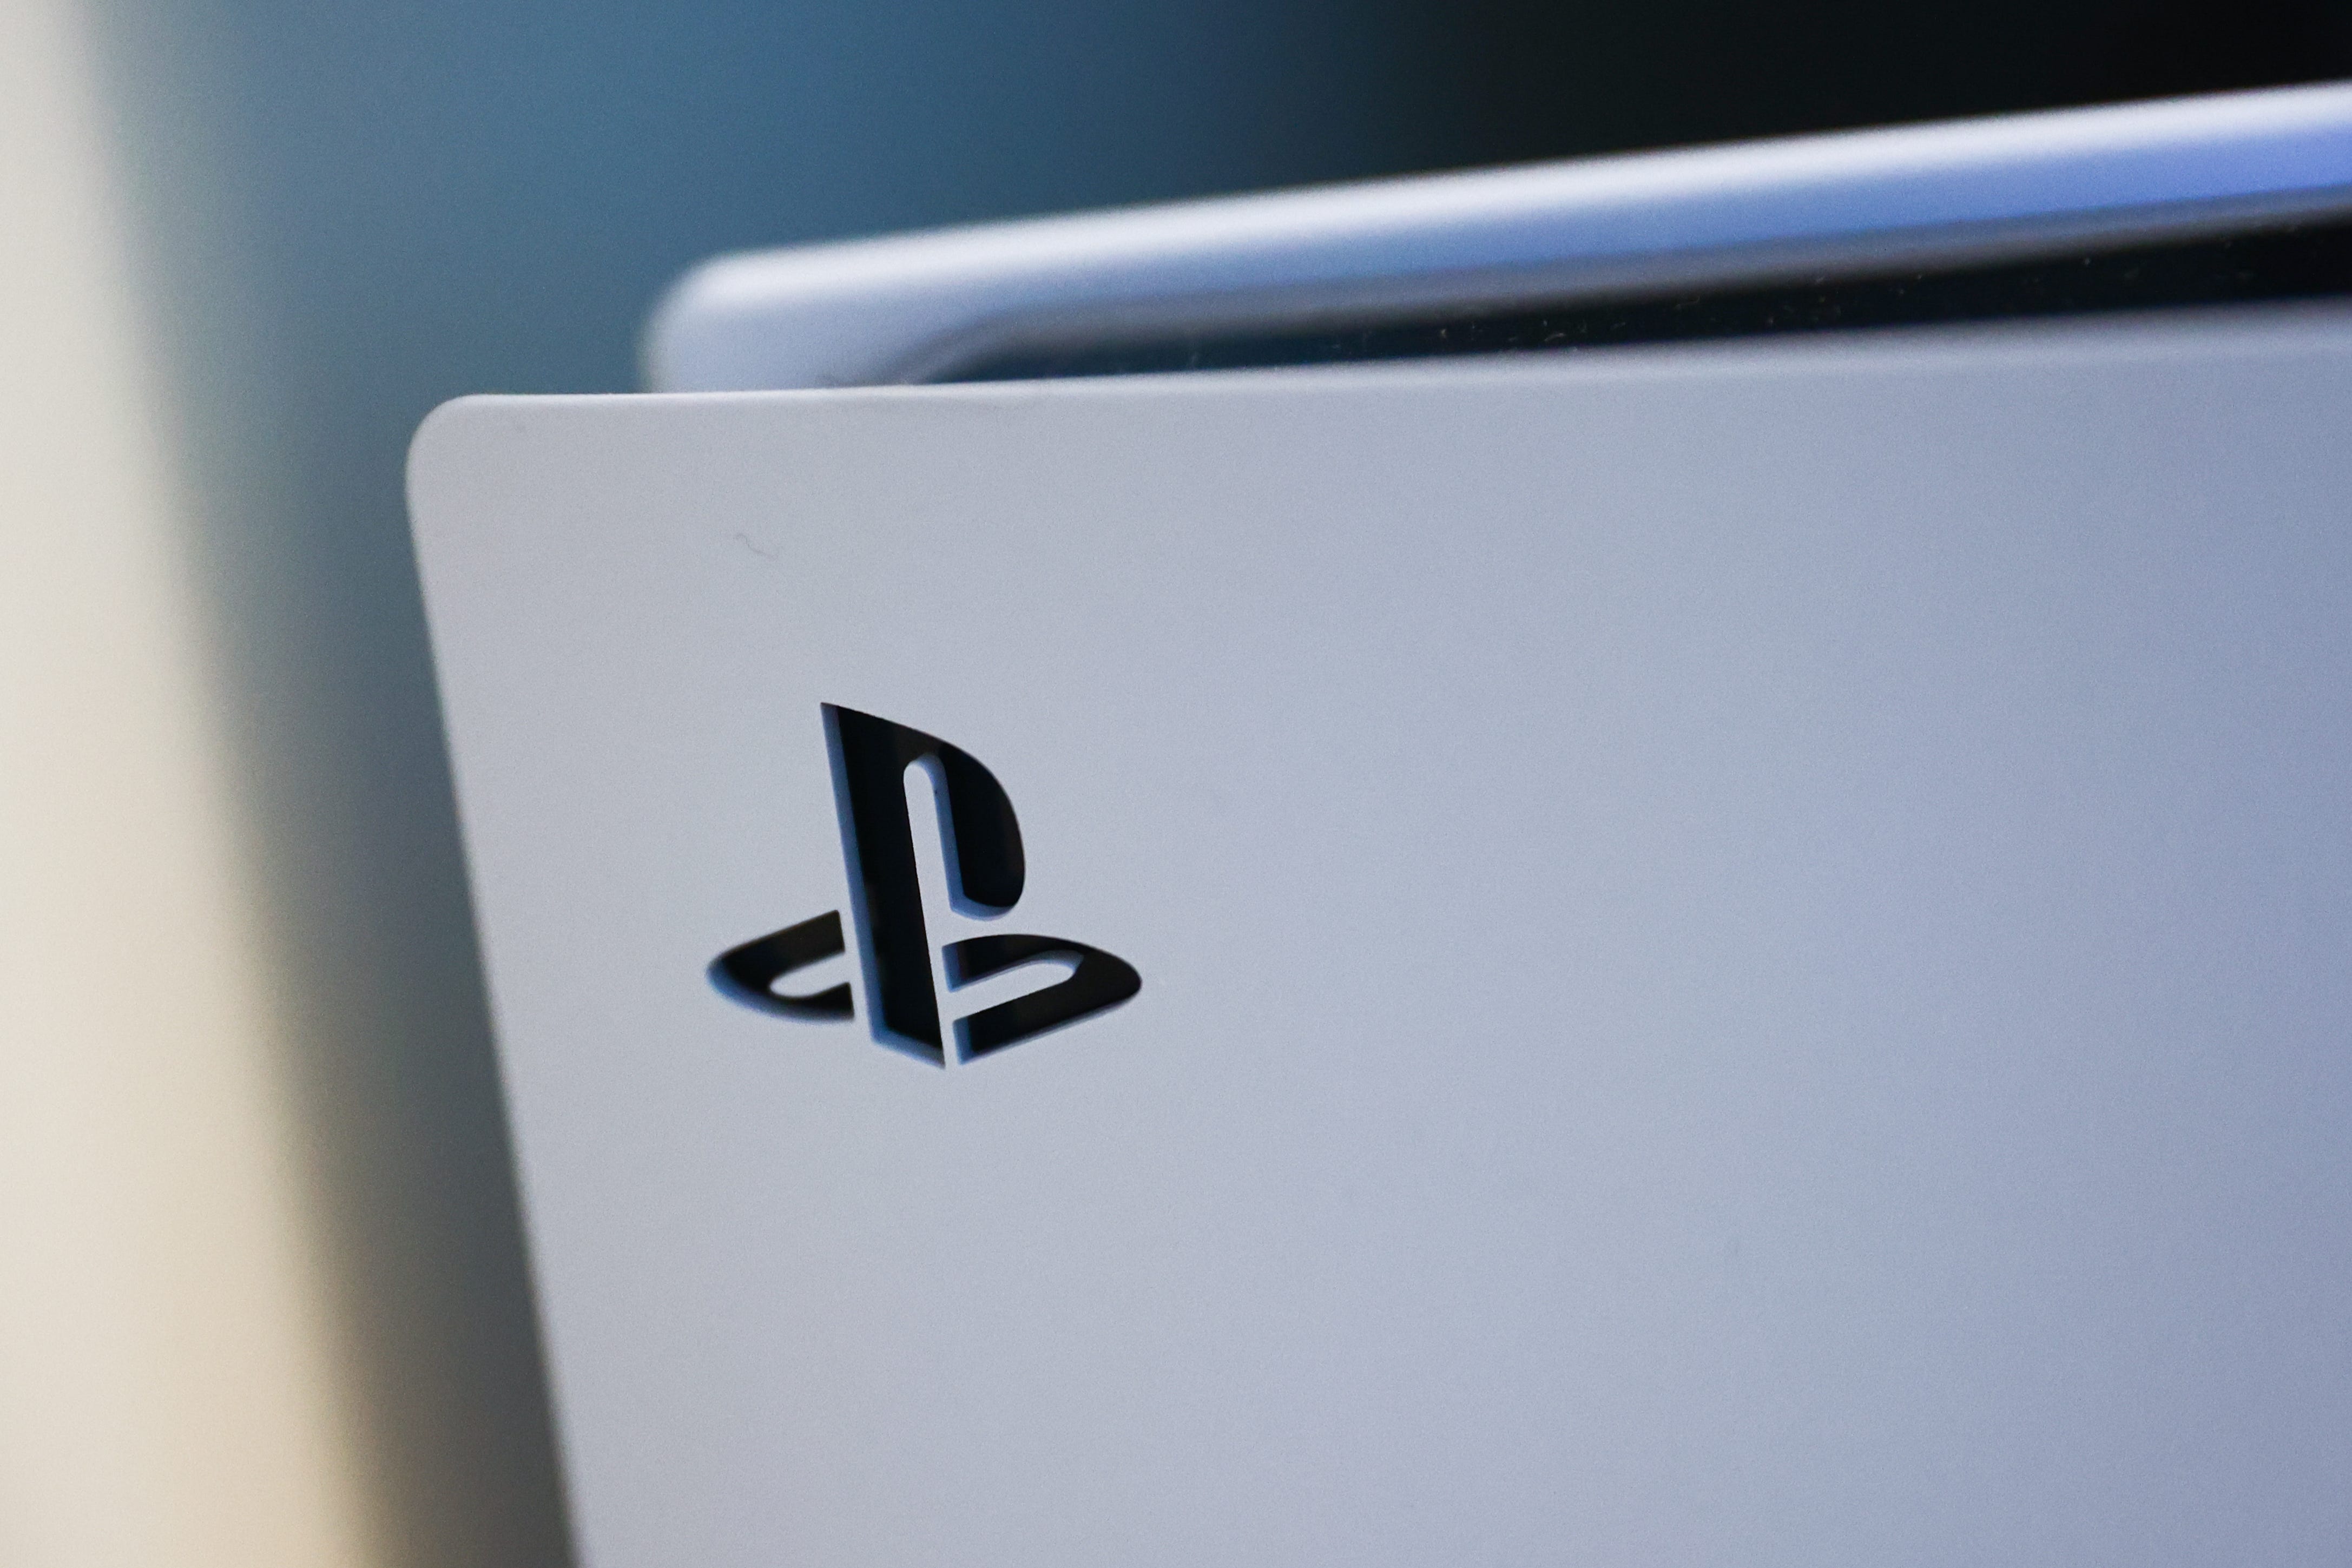 Sony hikes price of PS5 in Europe, Japan, and more - The Verge